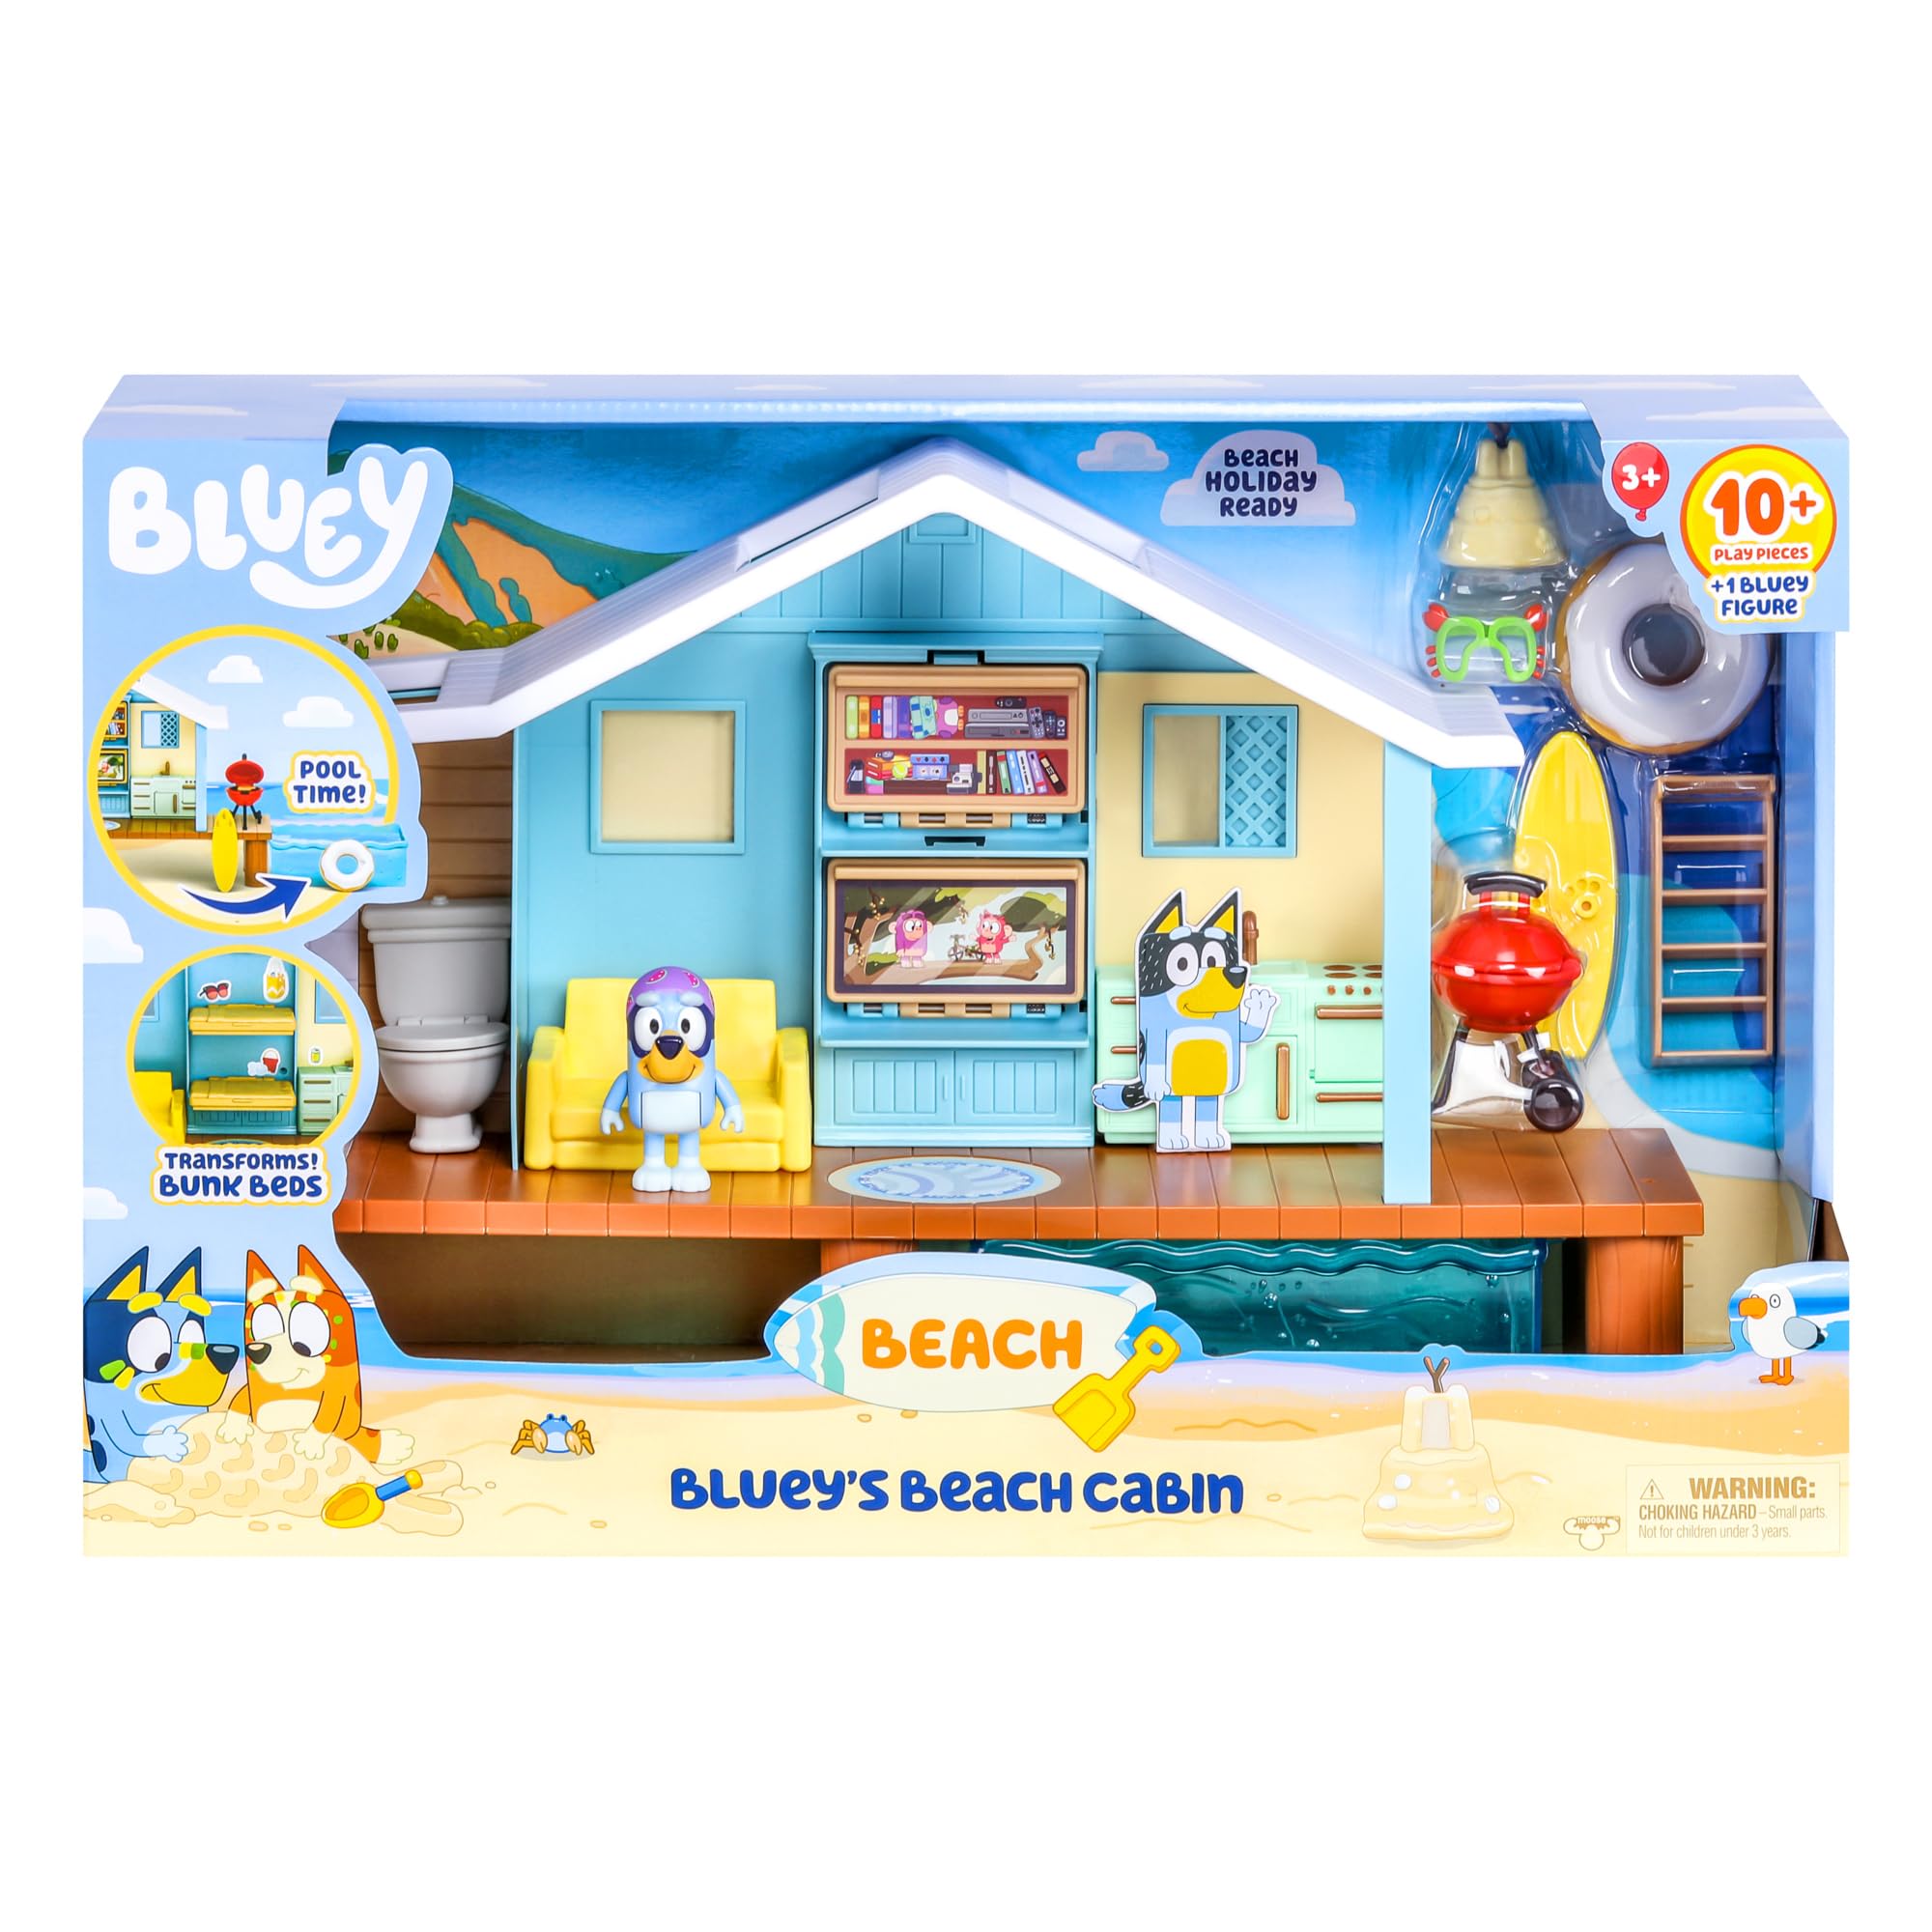 Bluey Beach Cabin Playset, with Exclusive Figure with Goggles. Includes 10 Play Pieces and Sticker Sheet